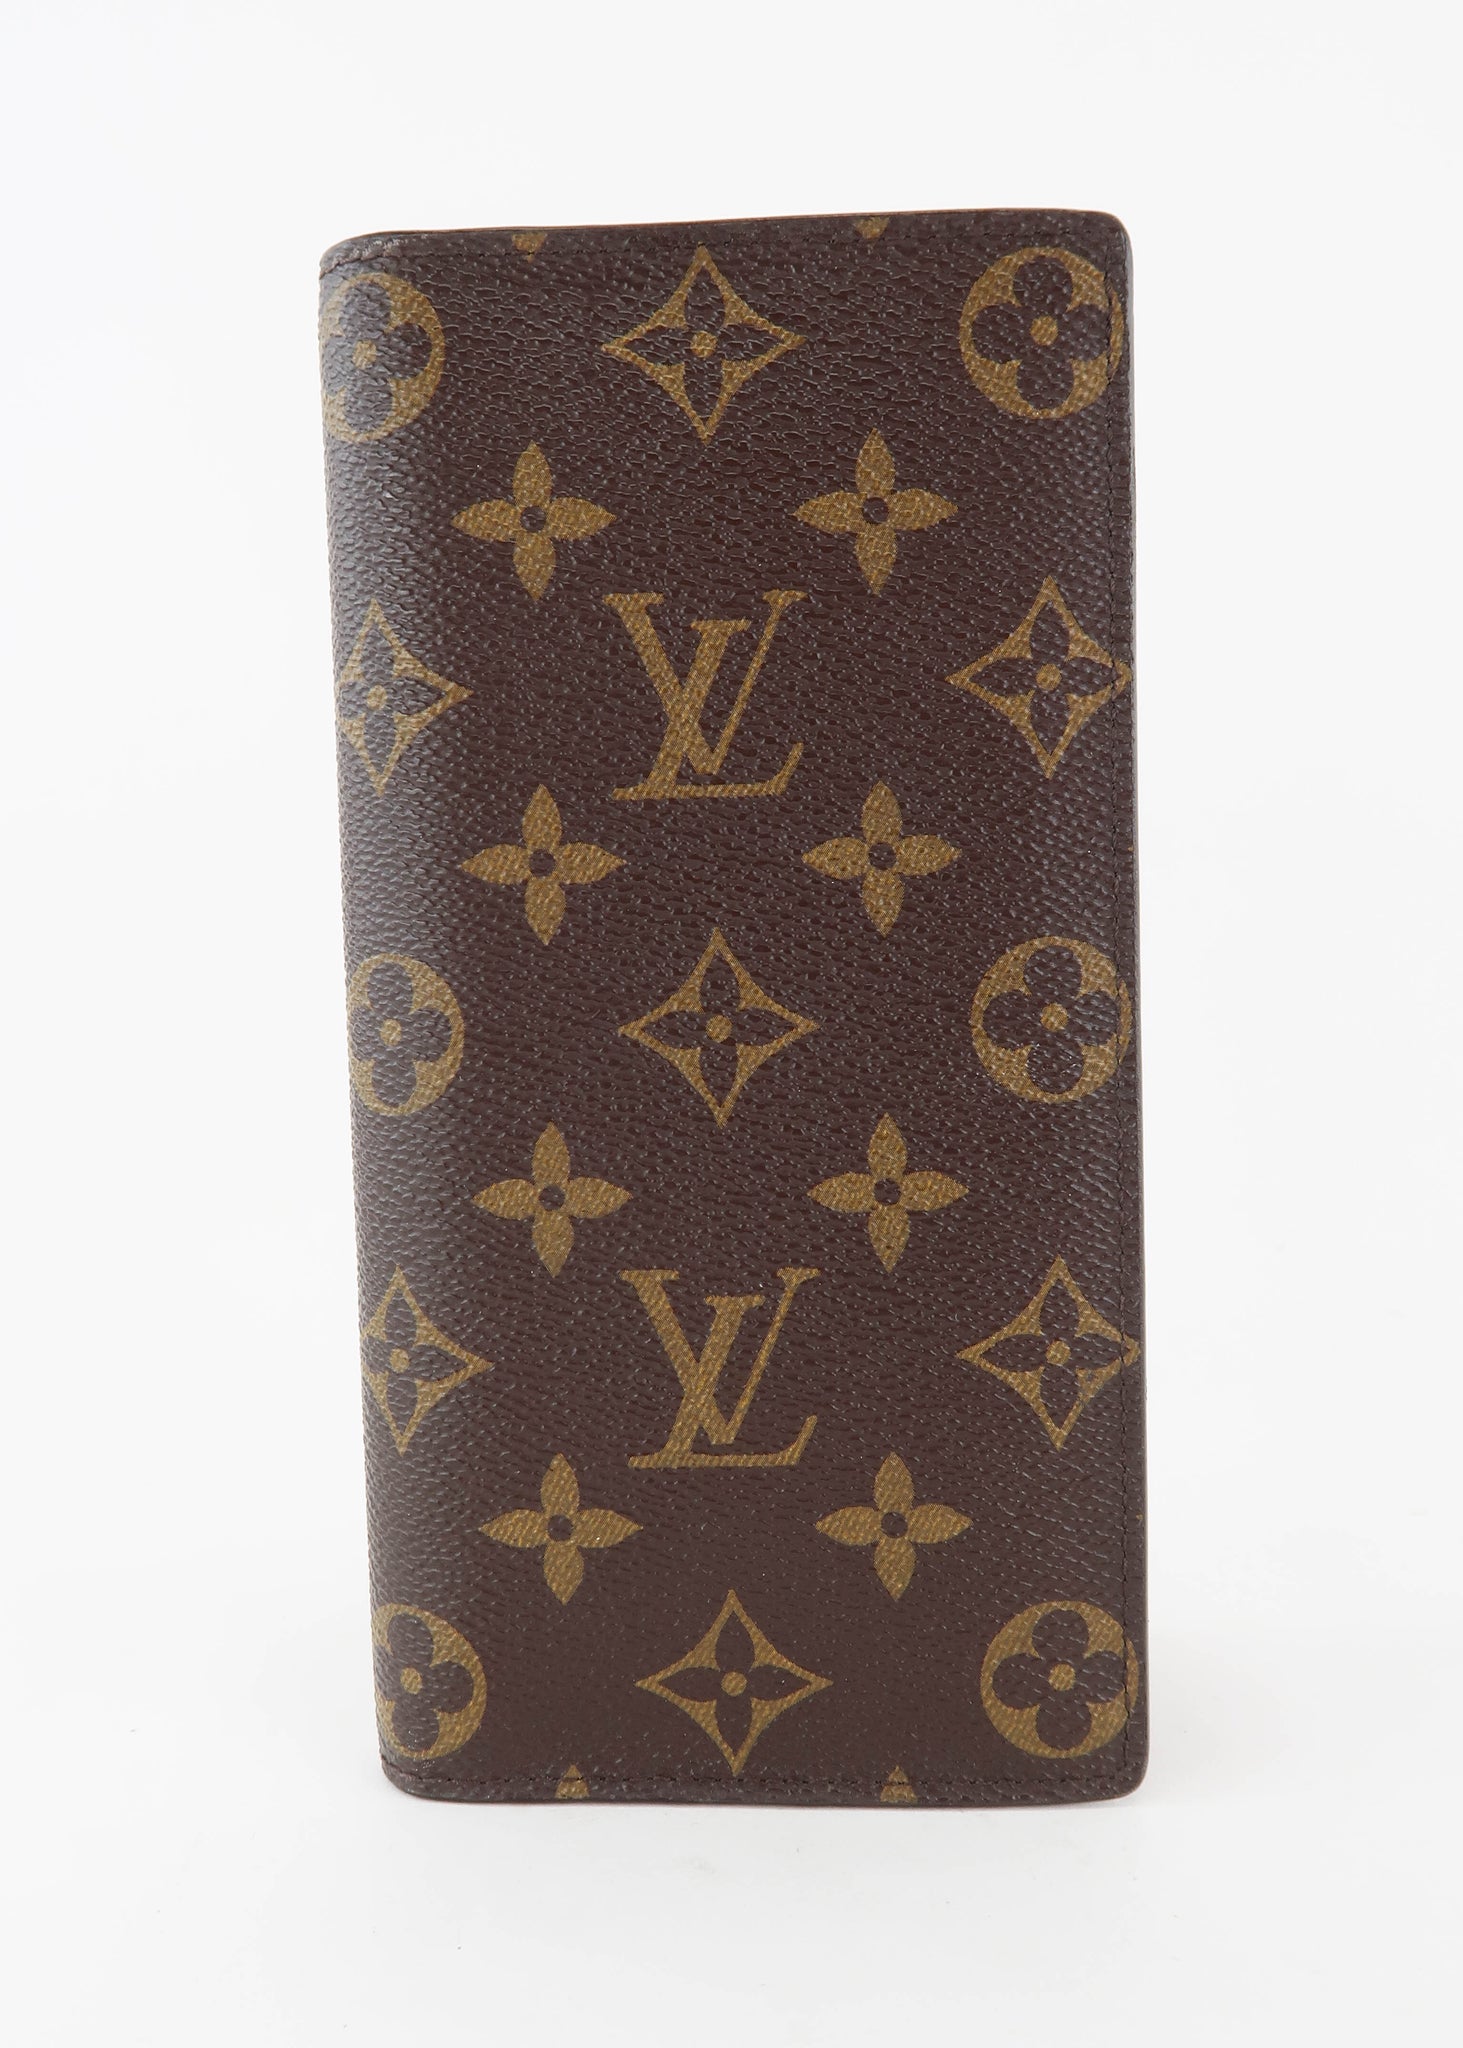 Brazza Wallet Monogram Other - Men - Small Leather Goods